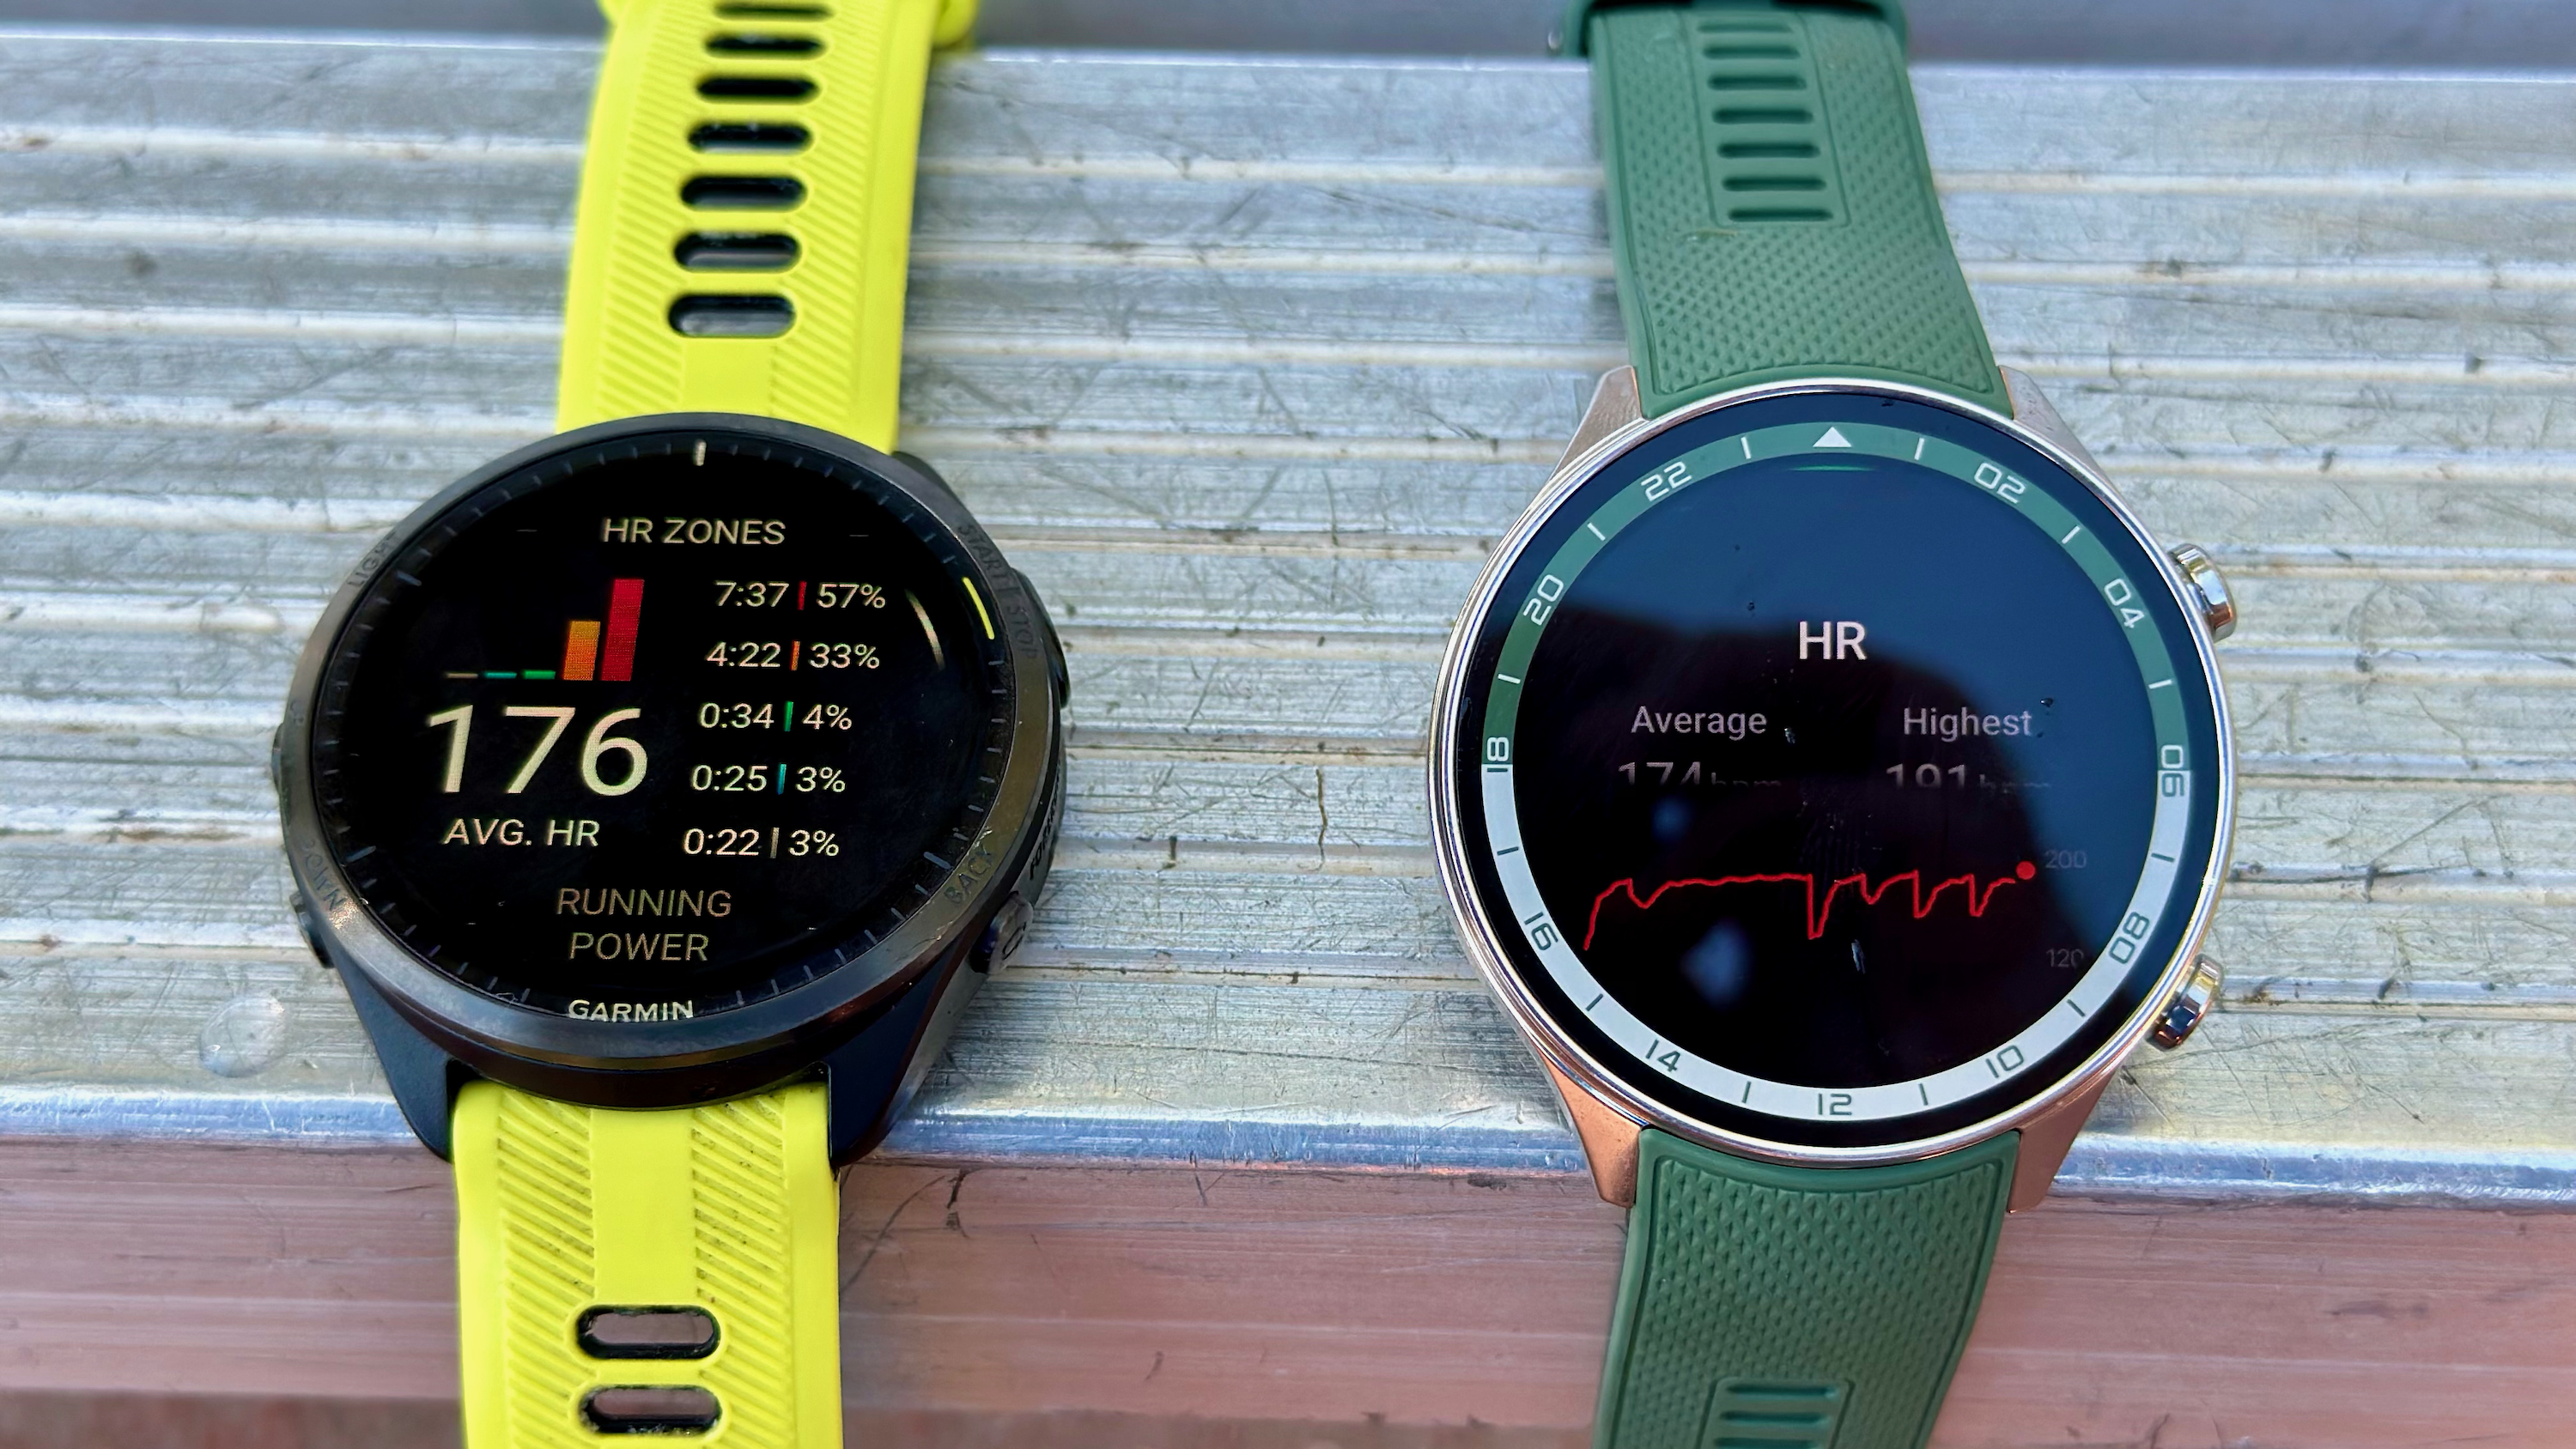 The OnePlus Watch 2R blew my low health expectancies out of the water